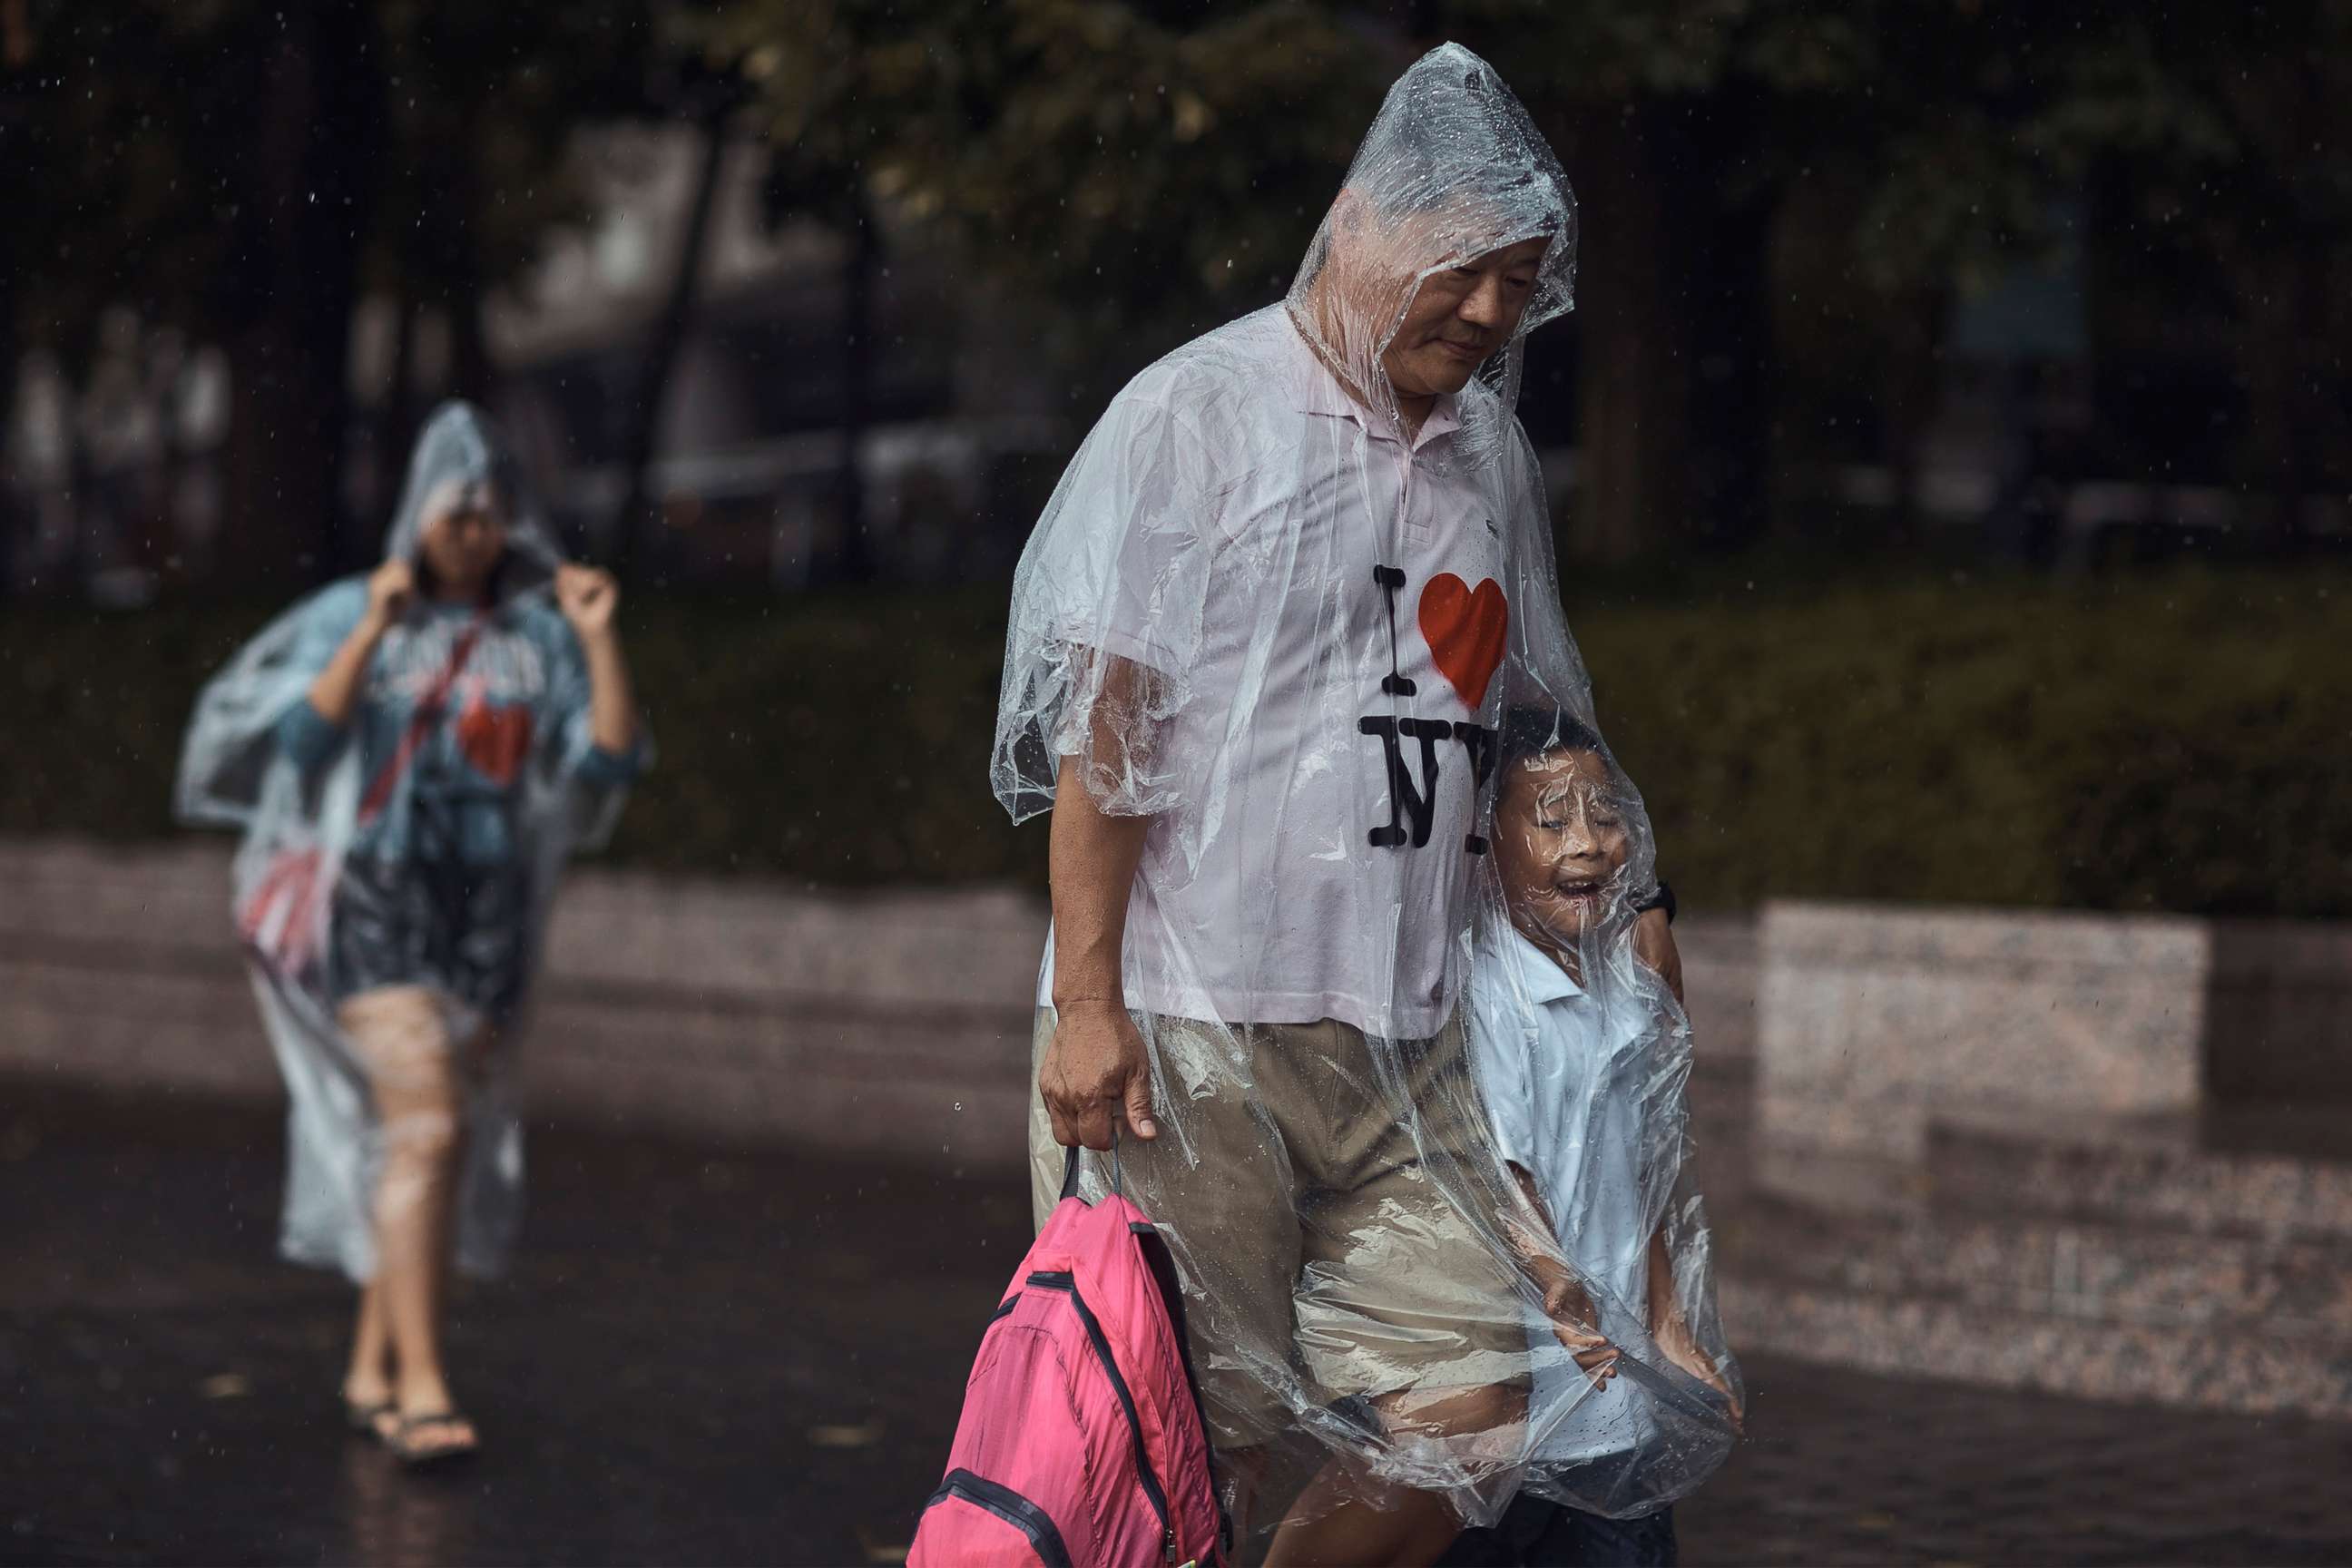 PHOTO: A family walks wearing rain covers, Thursday, July 21, 2022, in New York City.